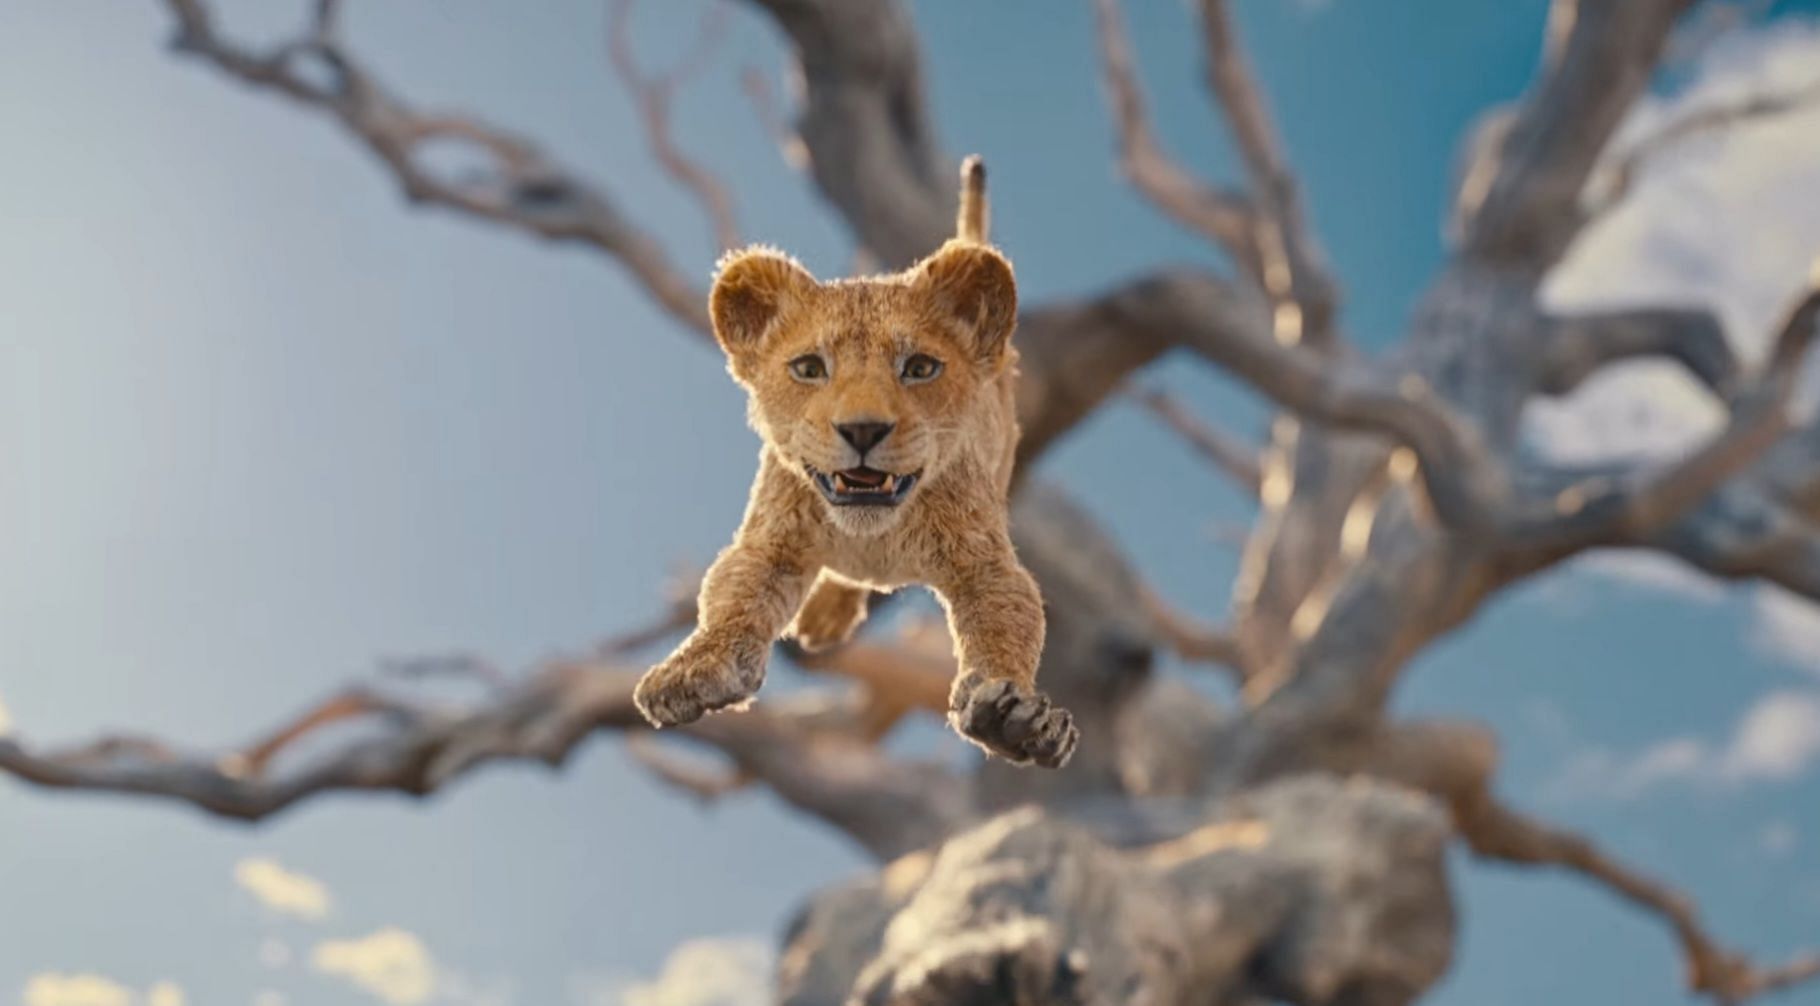 A still from Mufasa: The Lion King (Image via Walt Disney Studios, Mufasa: The Lion King teaser, 01:12)